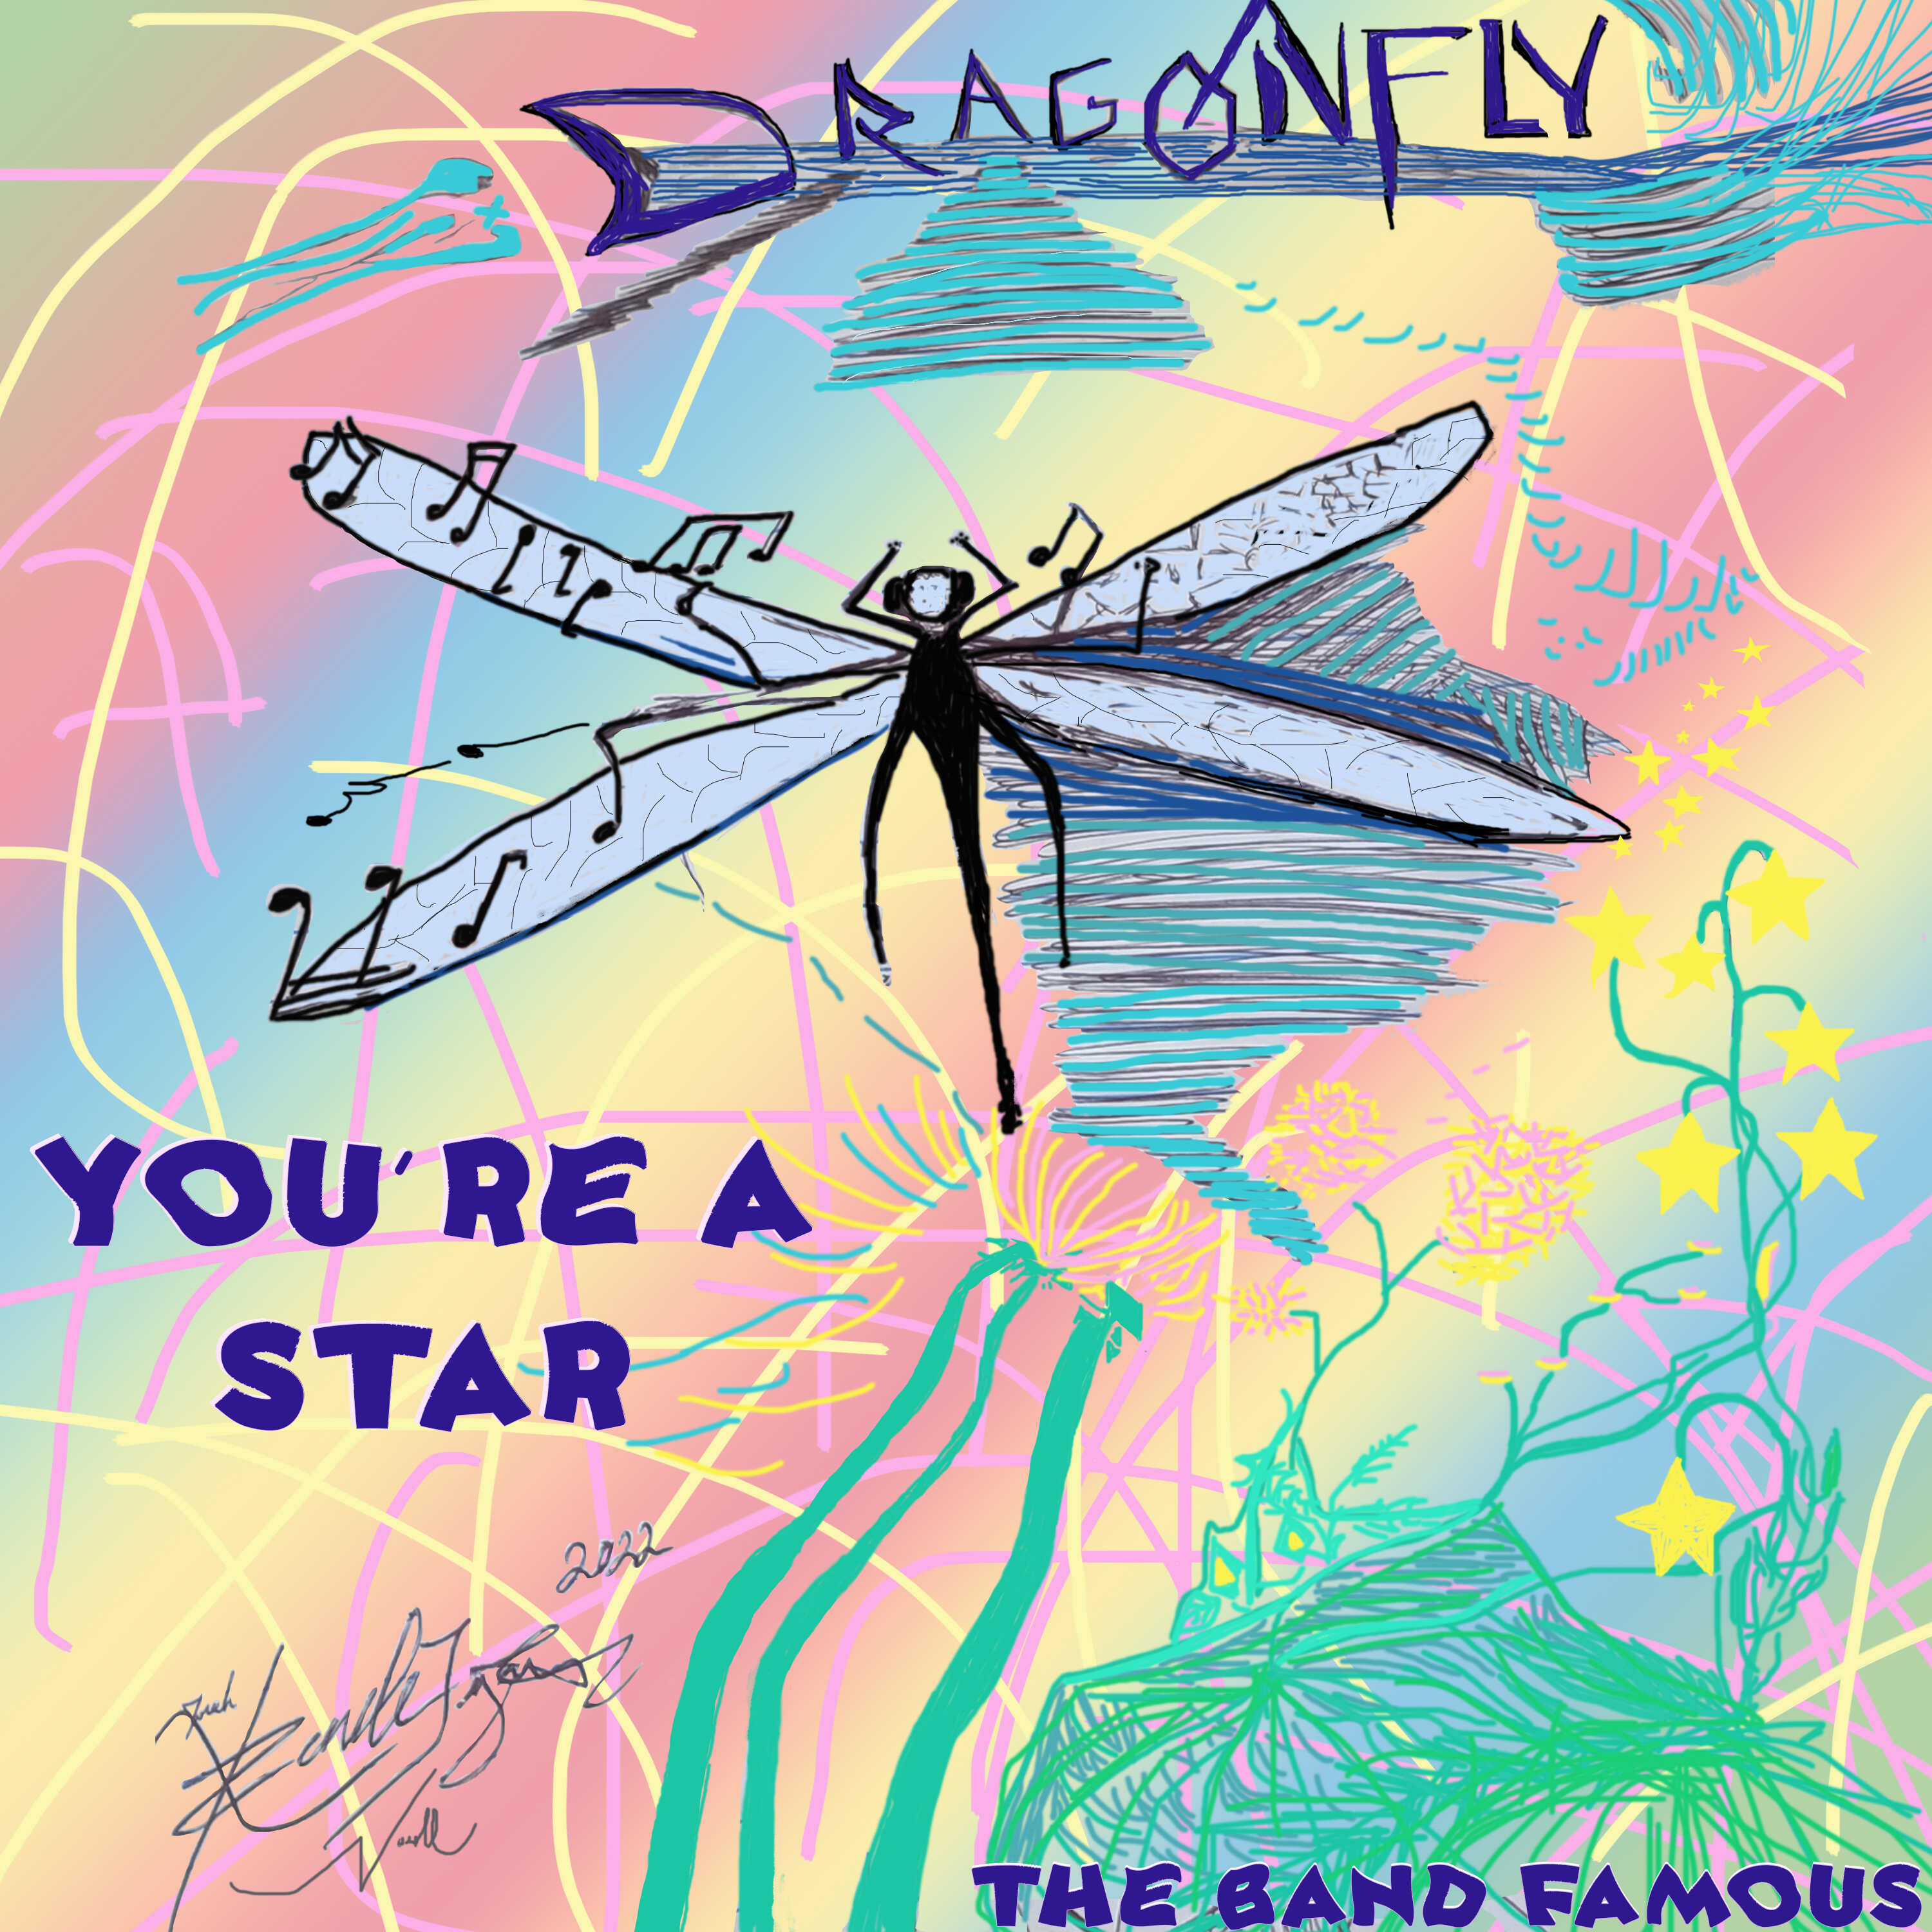 You're a Star, new single by The Band Famous out now!